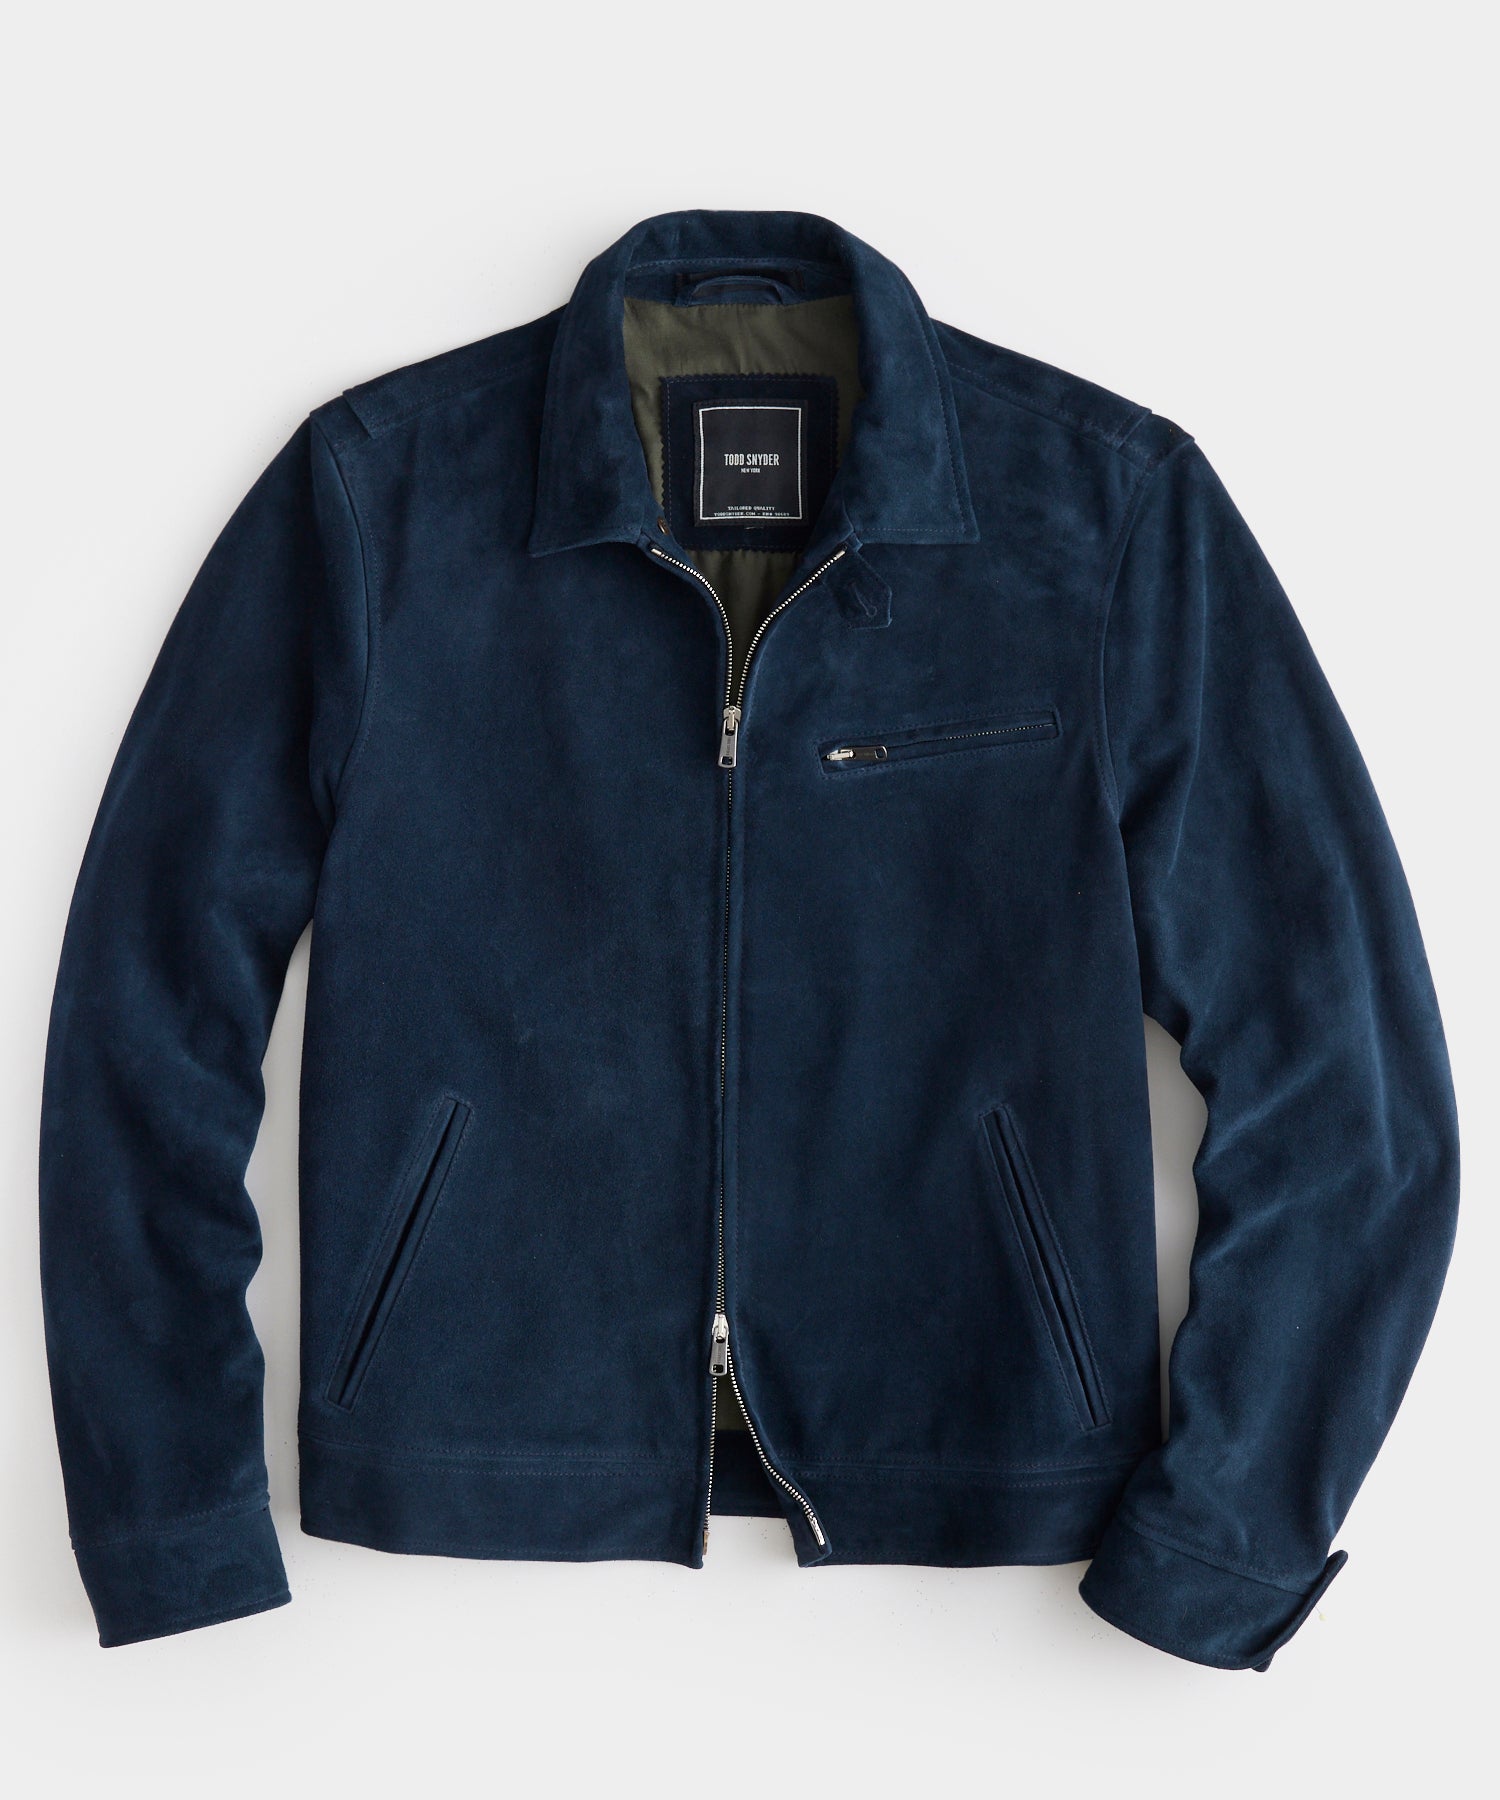 Todd Snyder - TODD SNYDER ITALIAN SUEDE DEAN JACKET IN NAVY - Rent With Thred